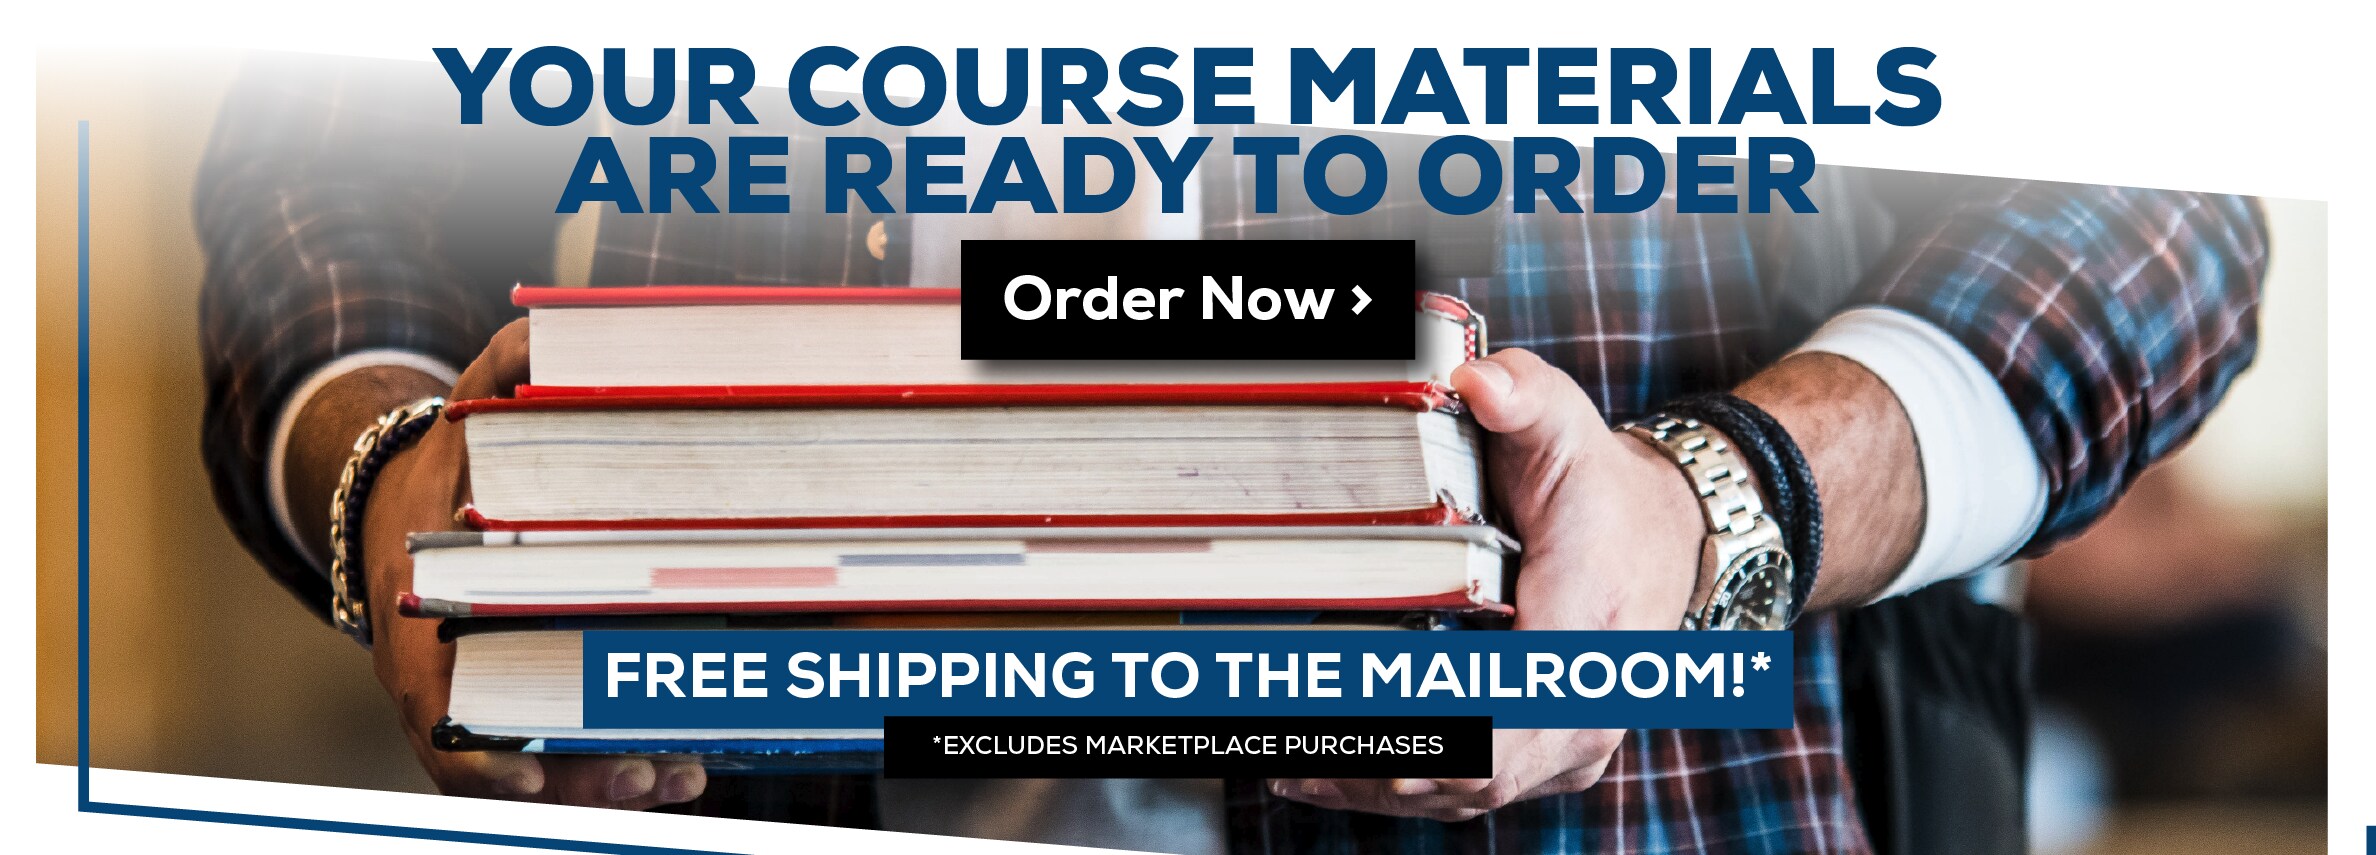 Your Course Materials are Ready to Order. Order Now. Free shipping to the Mailroom! *Excludes marketplace purchases.